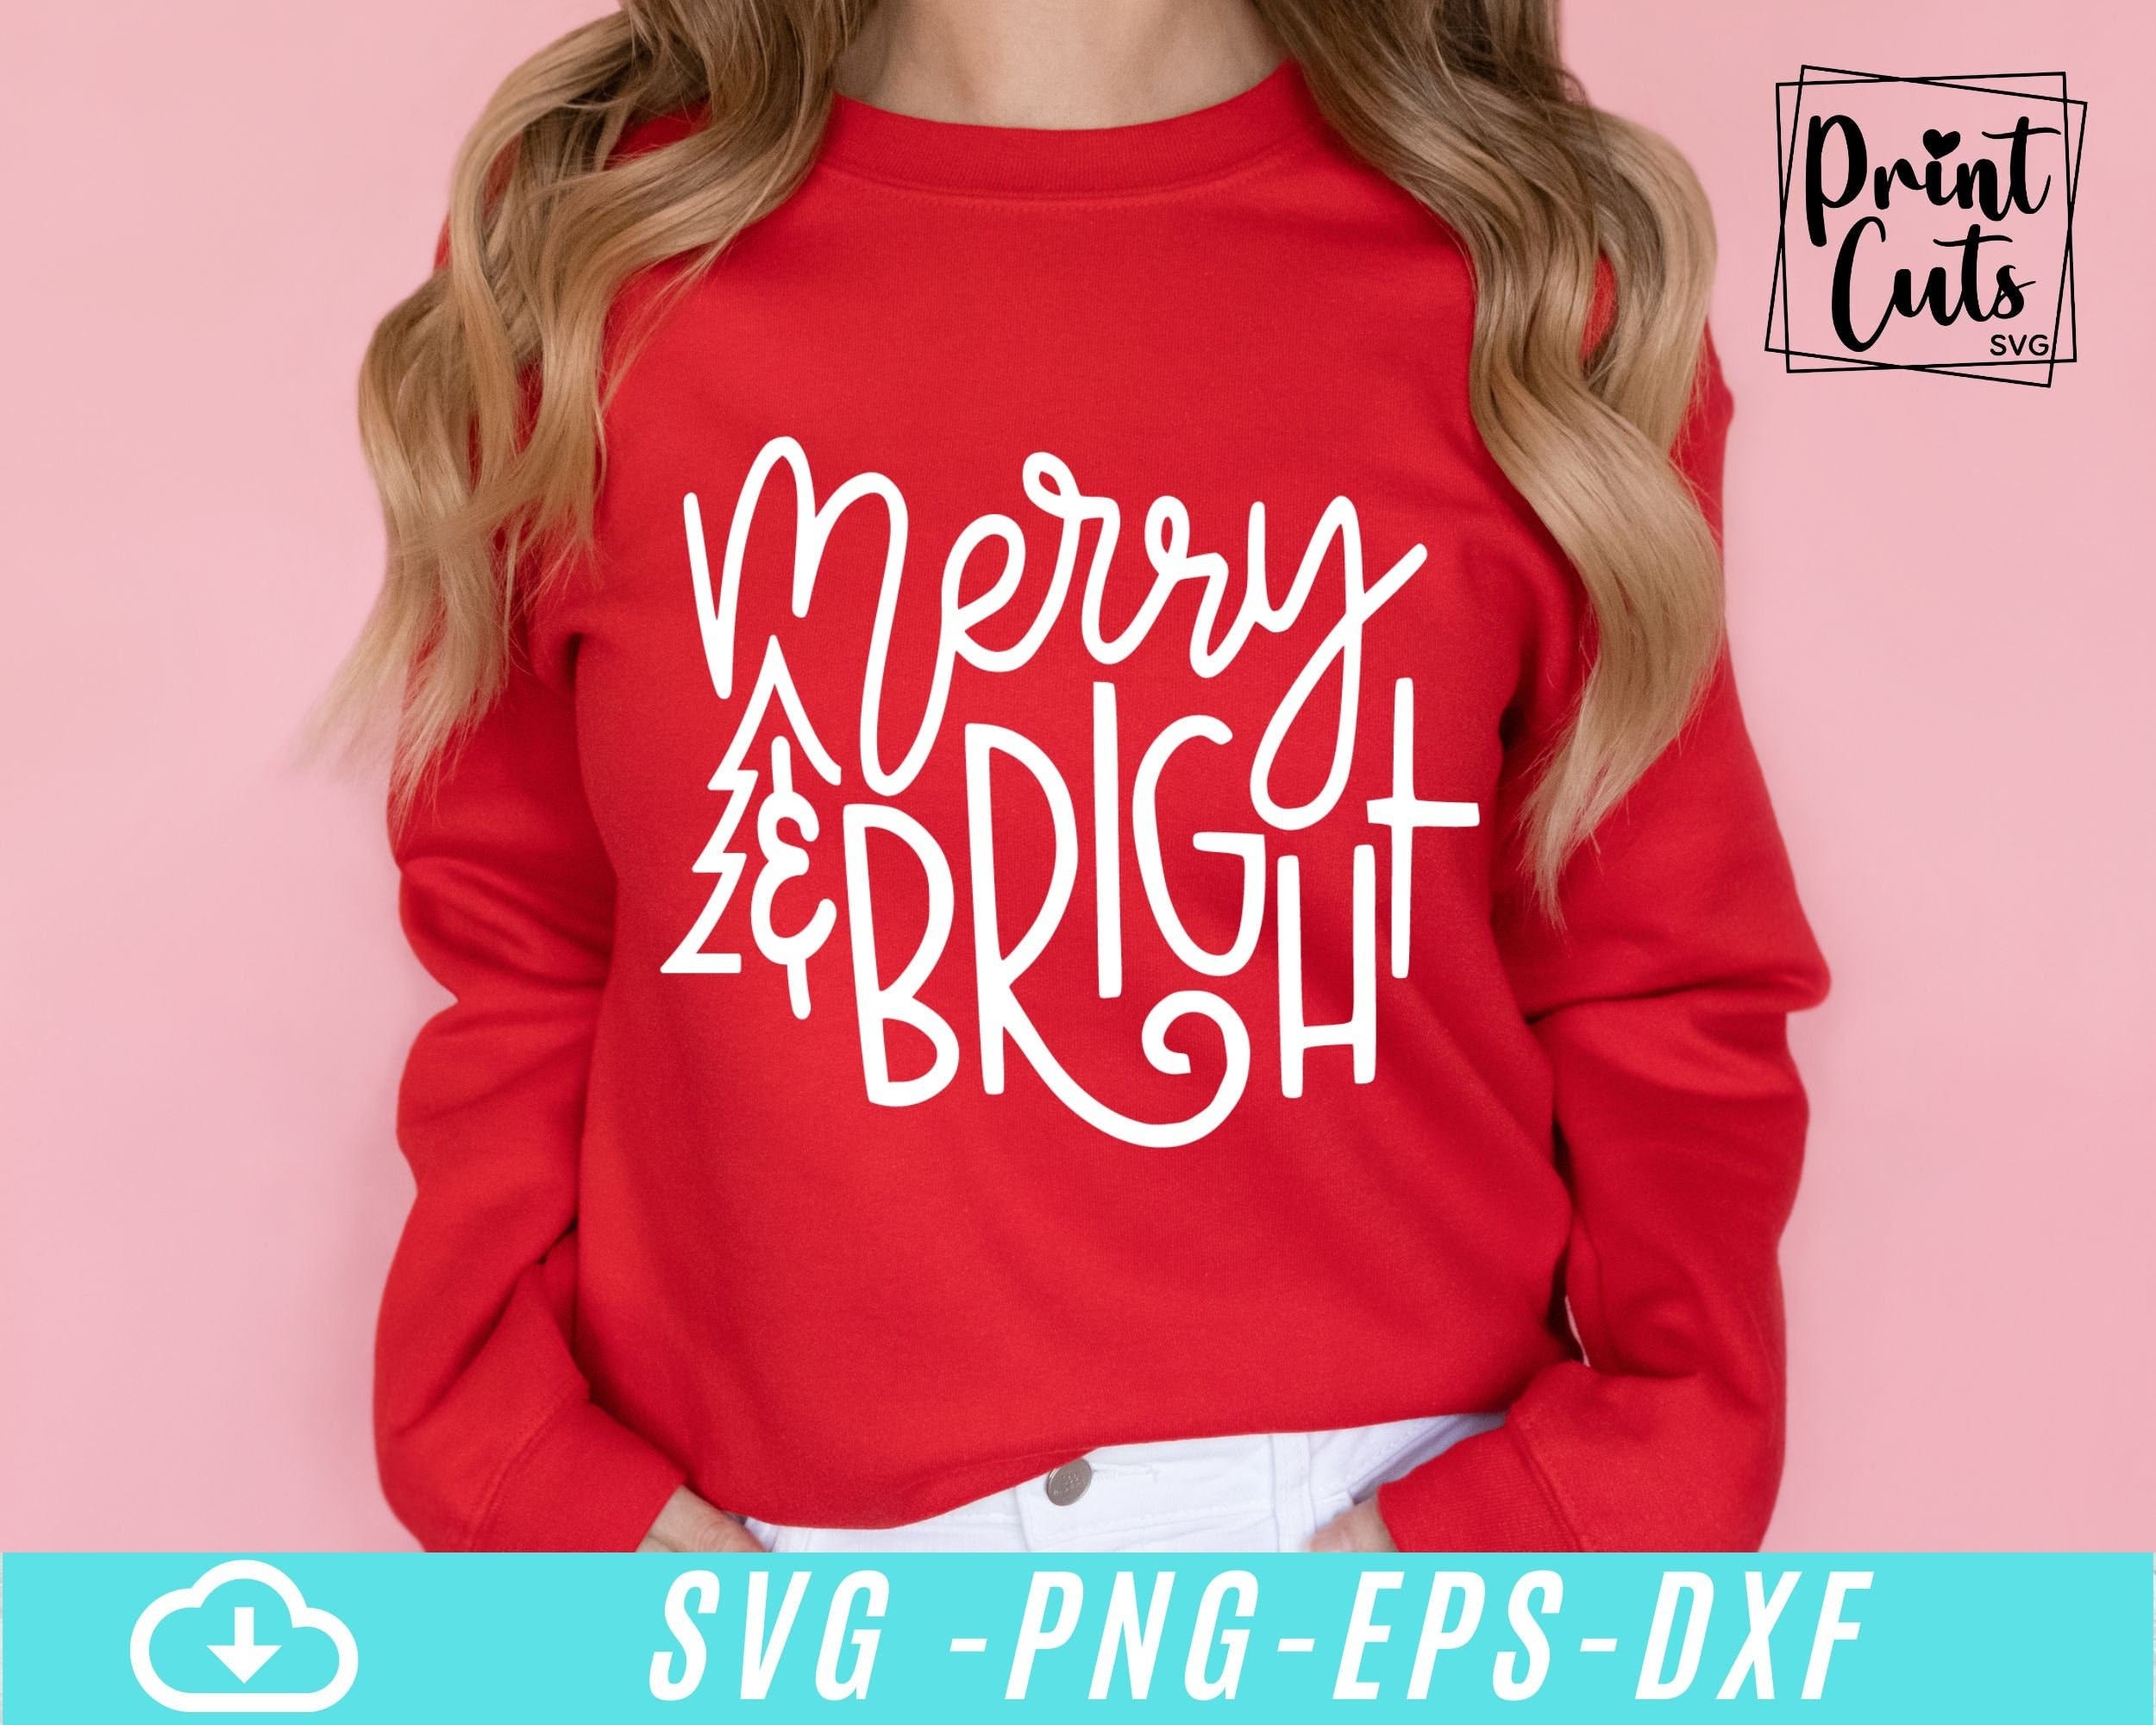 Merry and Bright Svg, Christmas Ornaments Svg, Christmas Svg, Holiday Decor Svg, Christmas Shirt Svg , SVG Cut File For Cricut , Silhouette